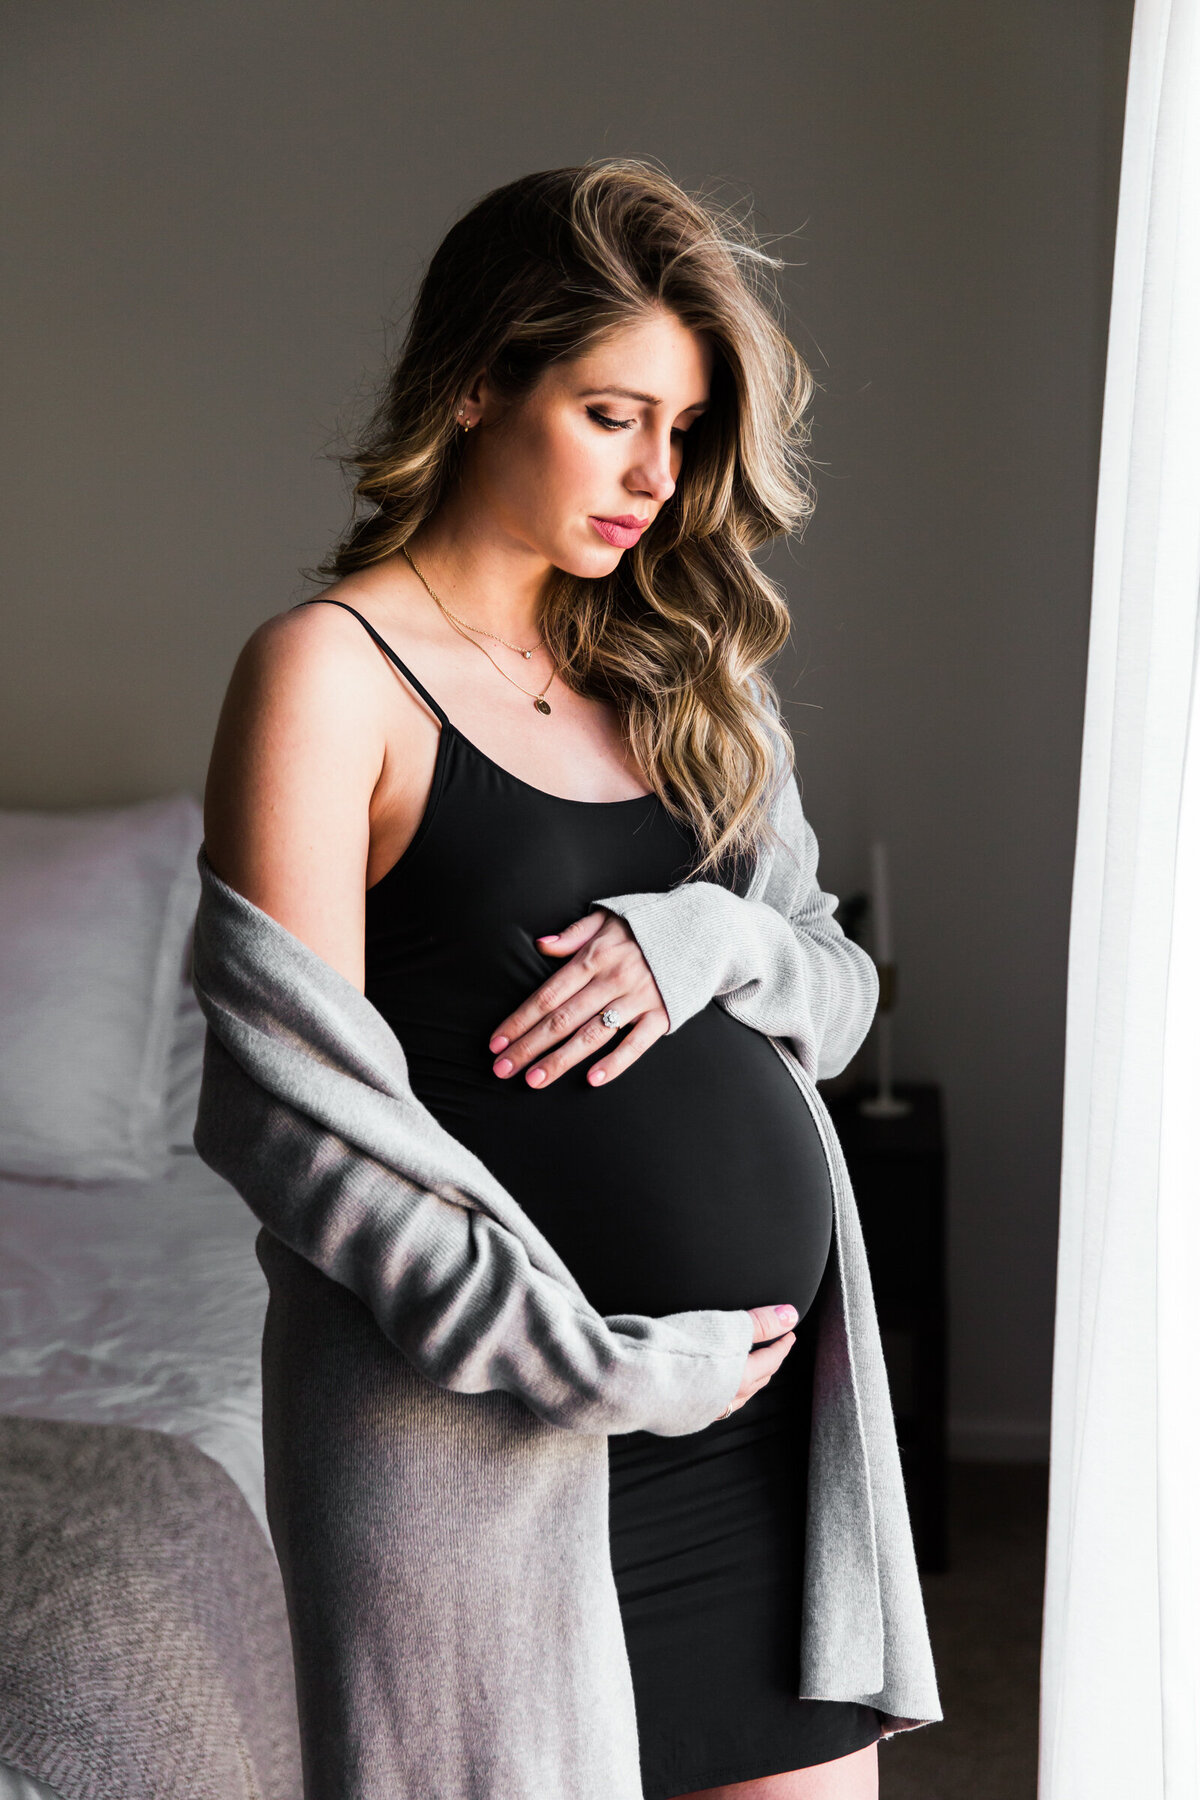 pregnant woman holding baby bump for at home lifestyle maternity photography session